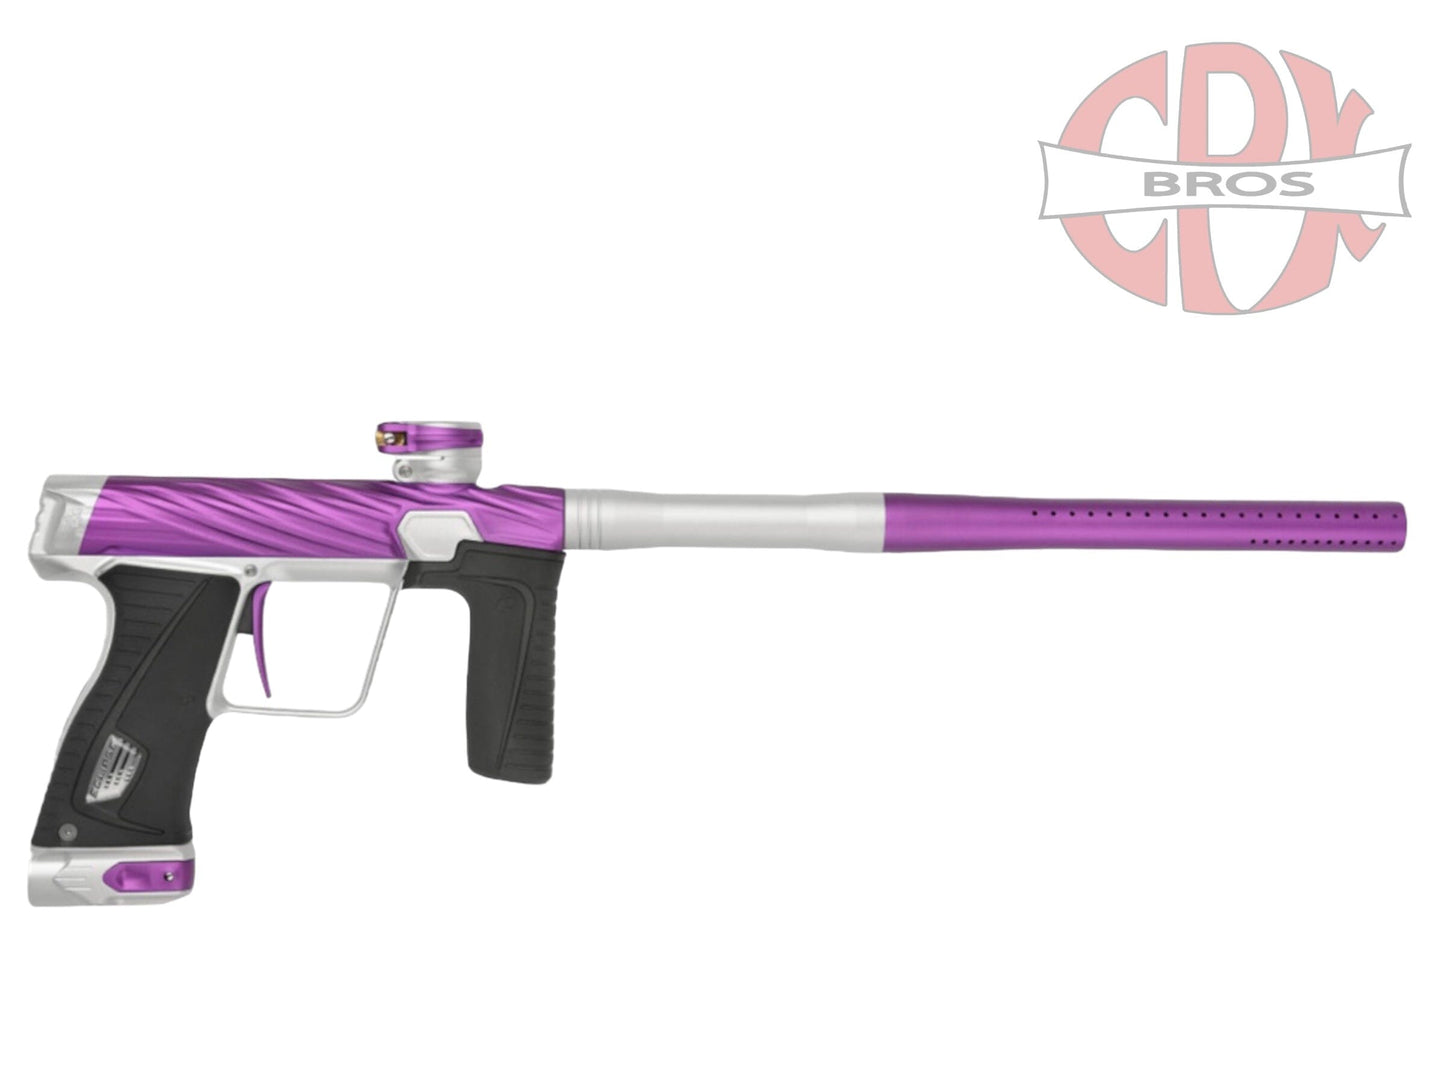 Used HK Army Orbit Gtek 180R- Purple/Silver Paintball Gun from CPXBrosPaintball Buy/Sell/Trade Paintball Markers, New Paintball Guns, Paintball Hoppers, Paintball Masks, and Hormesis Headbands